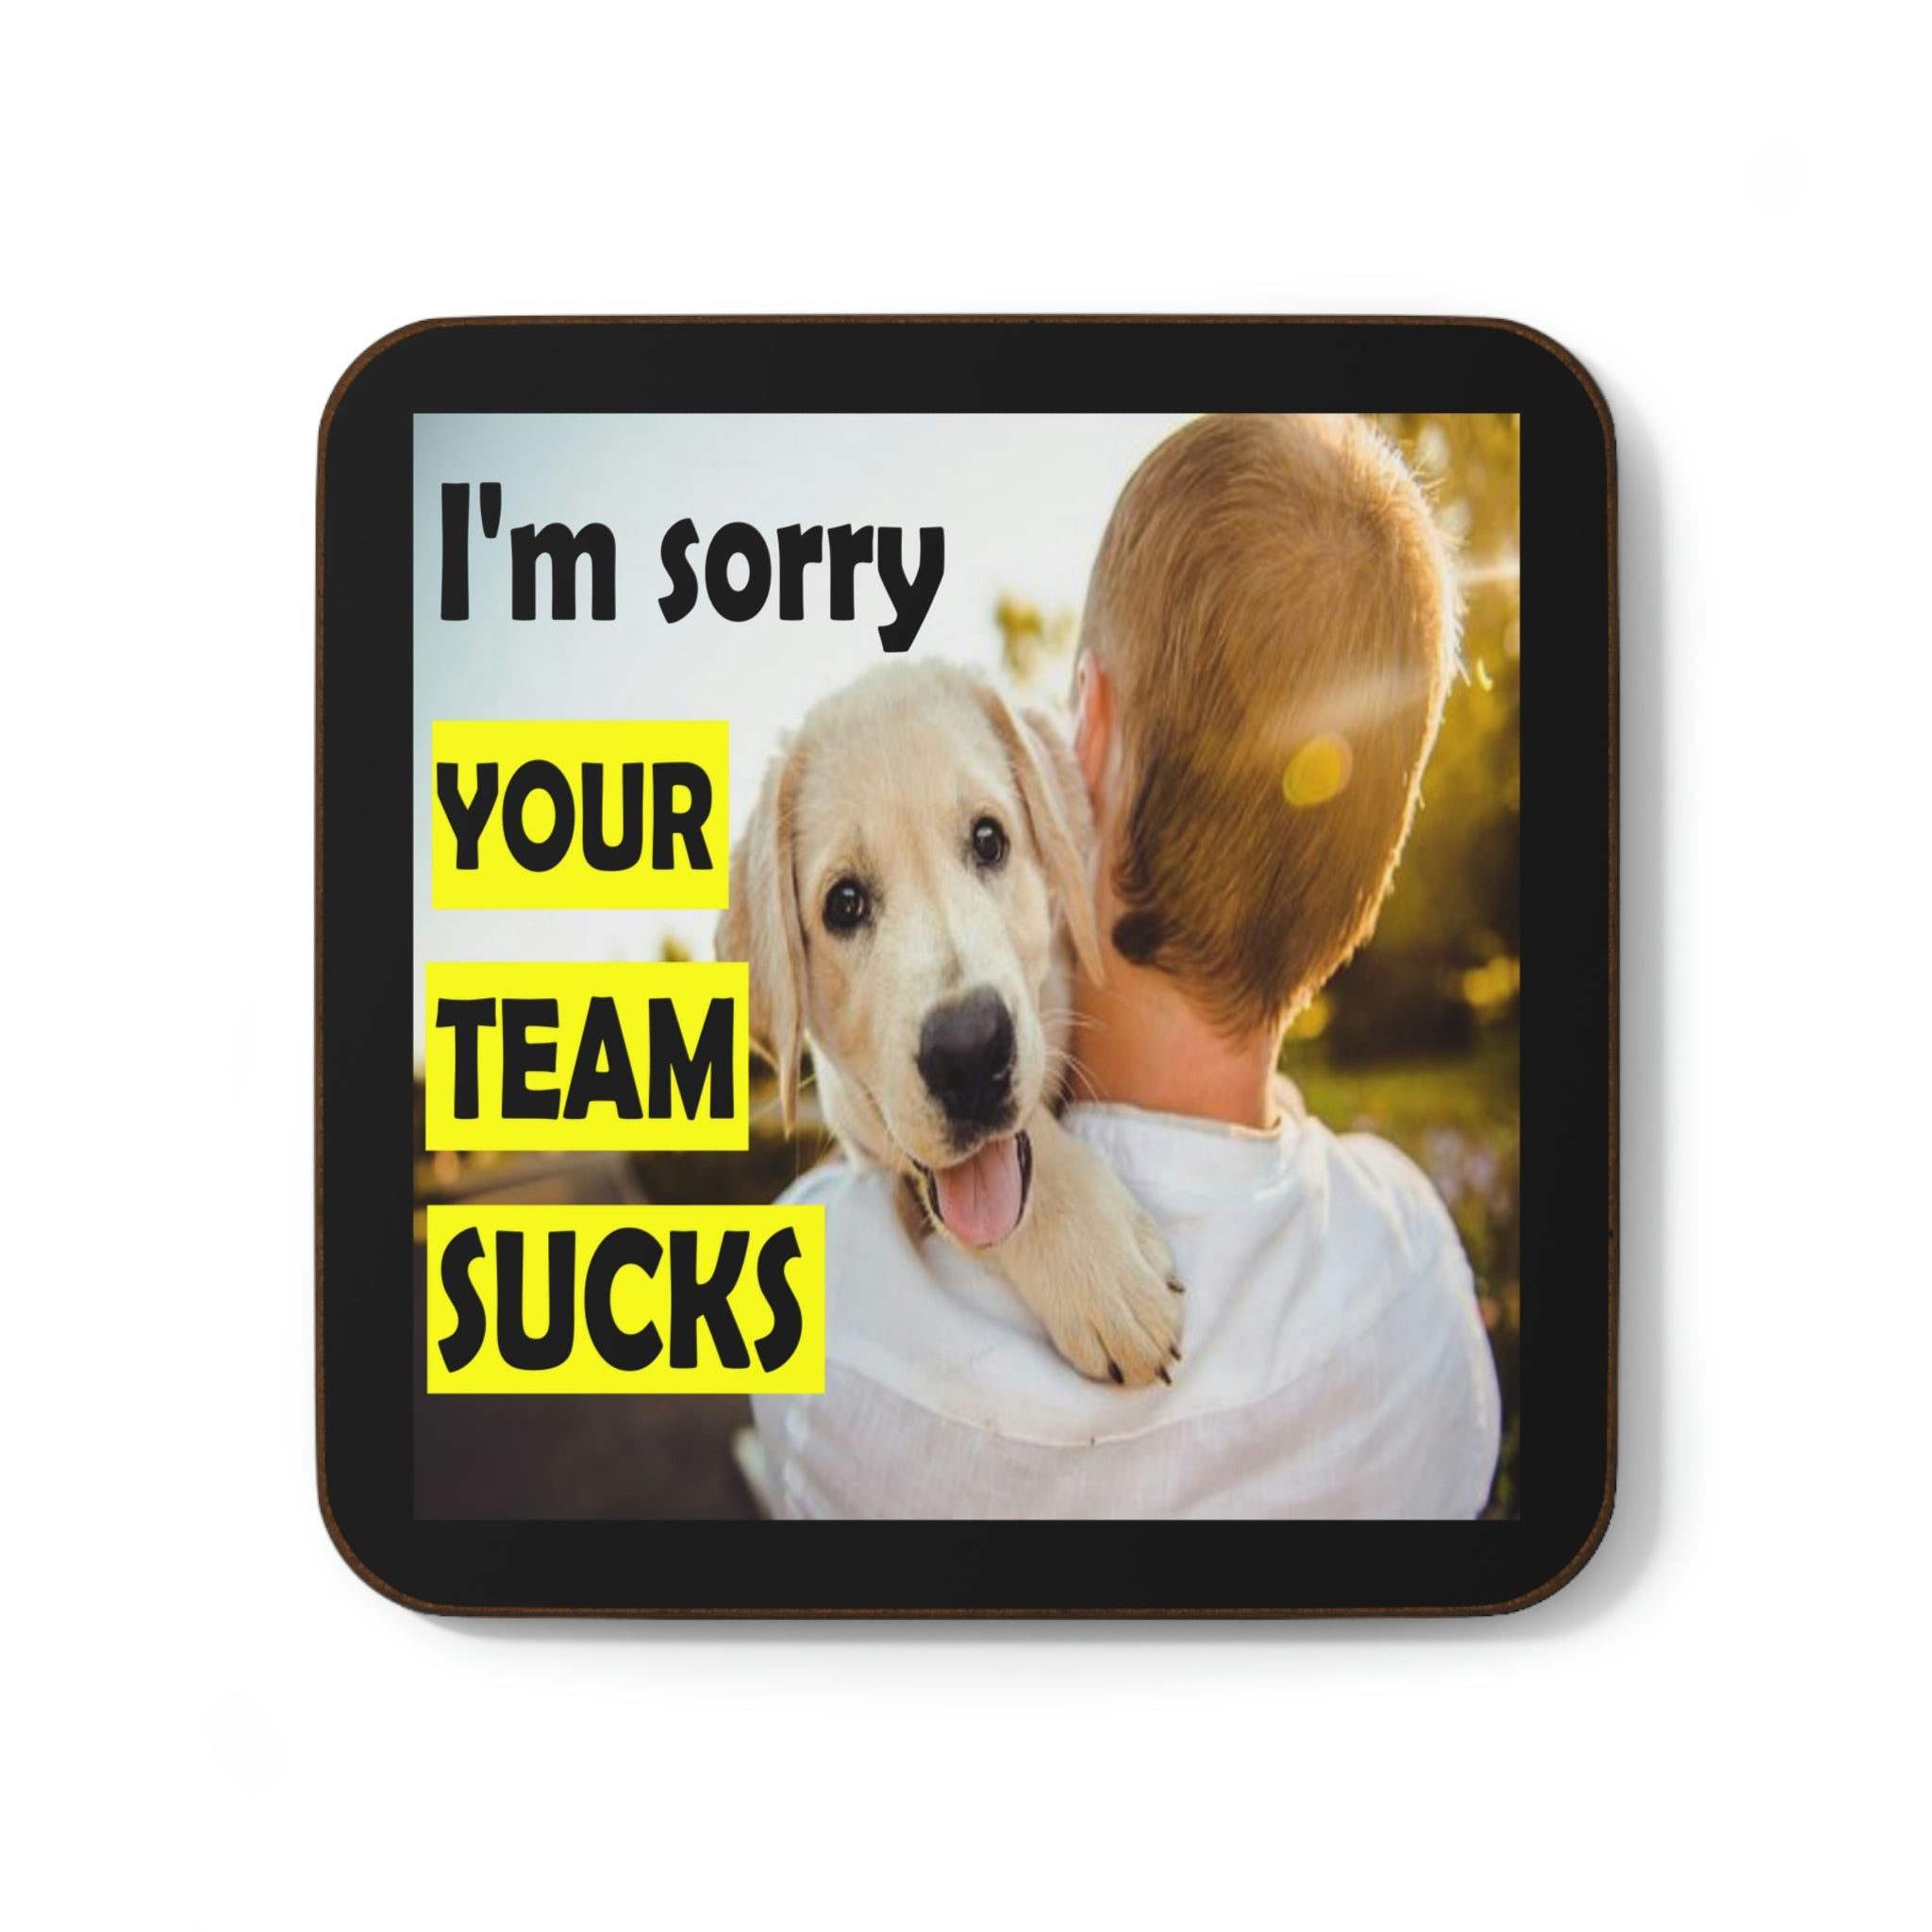 hardboard back coaster showing a puppy looking over a man's shoulder with the caption 'I'm sorry your team sucks'